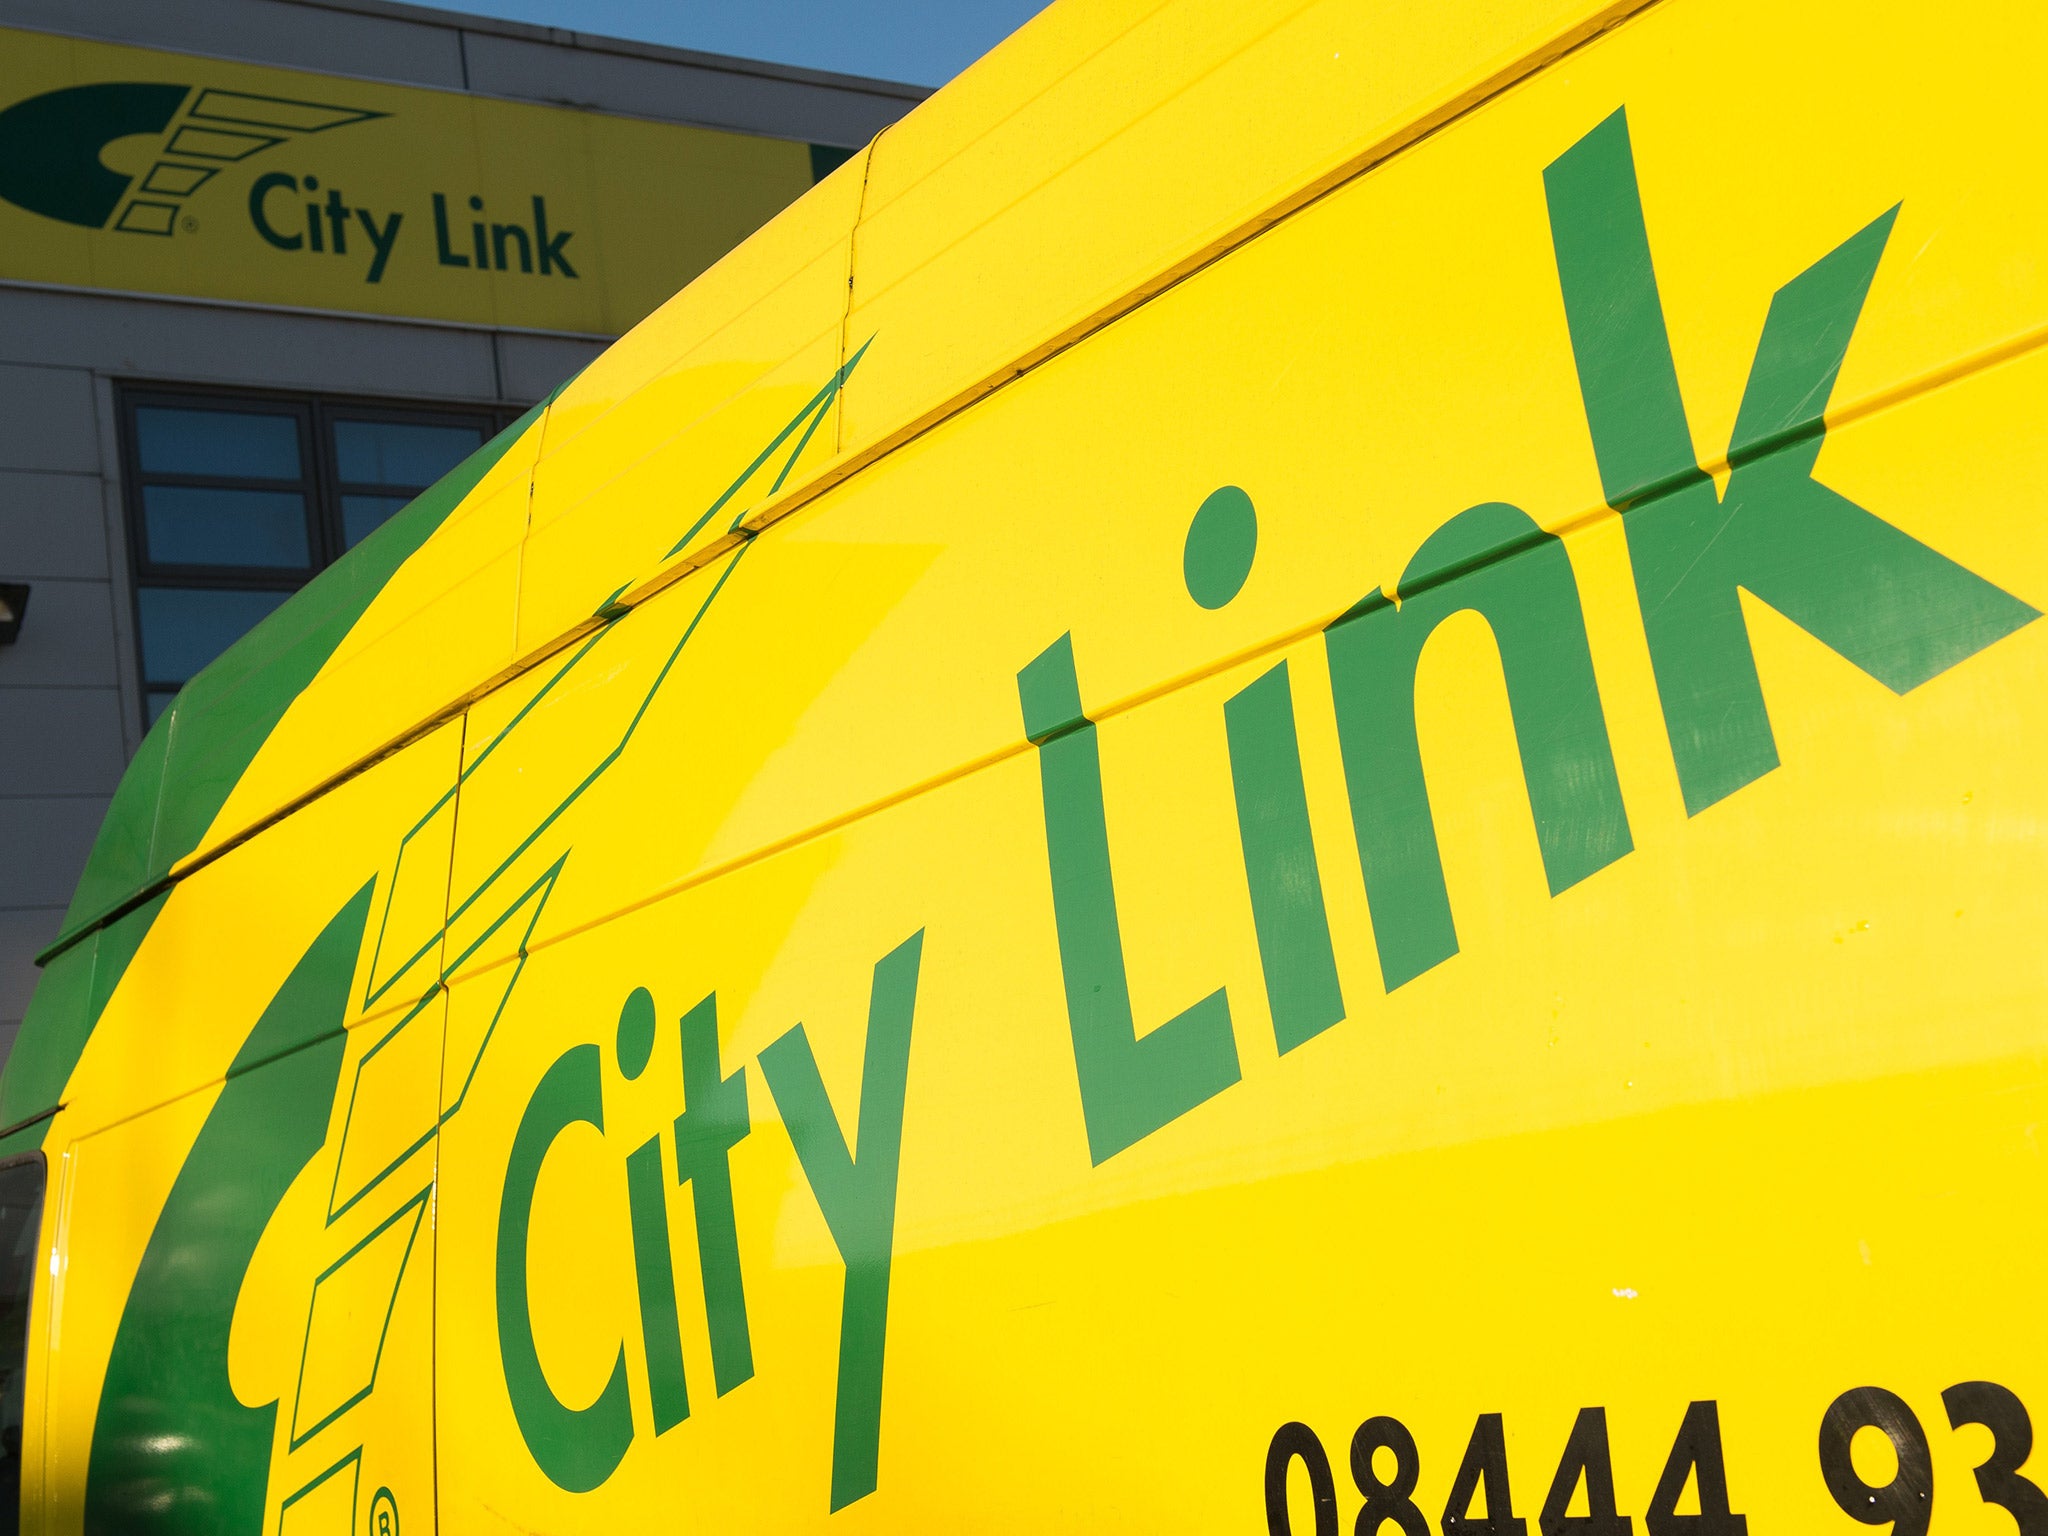 City Link's 1,000 self-employed van drivers are likely to miss out on any redundancy payments